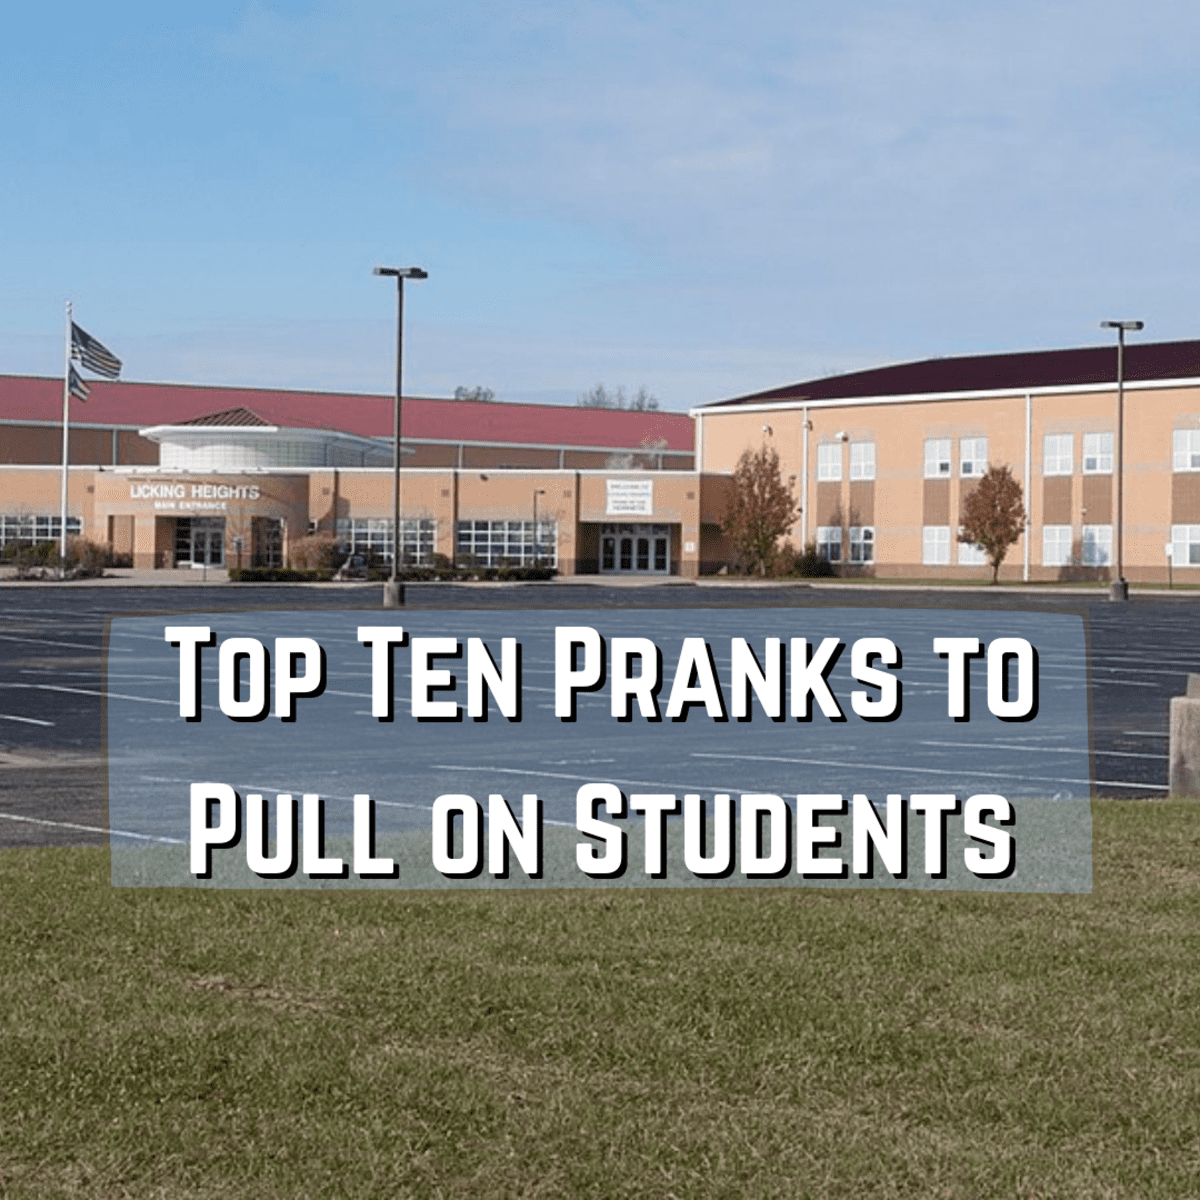 Top Ten Pranks to Pull on Students - Owlcation